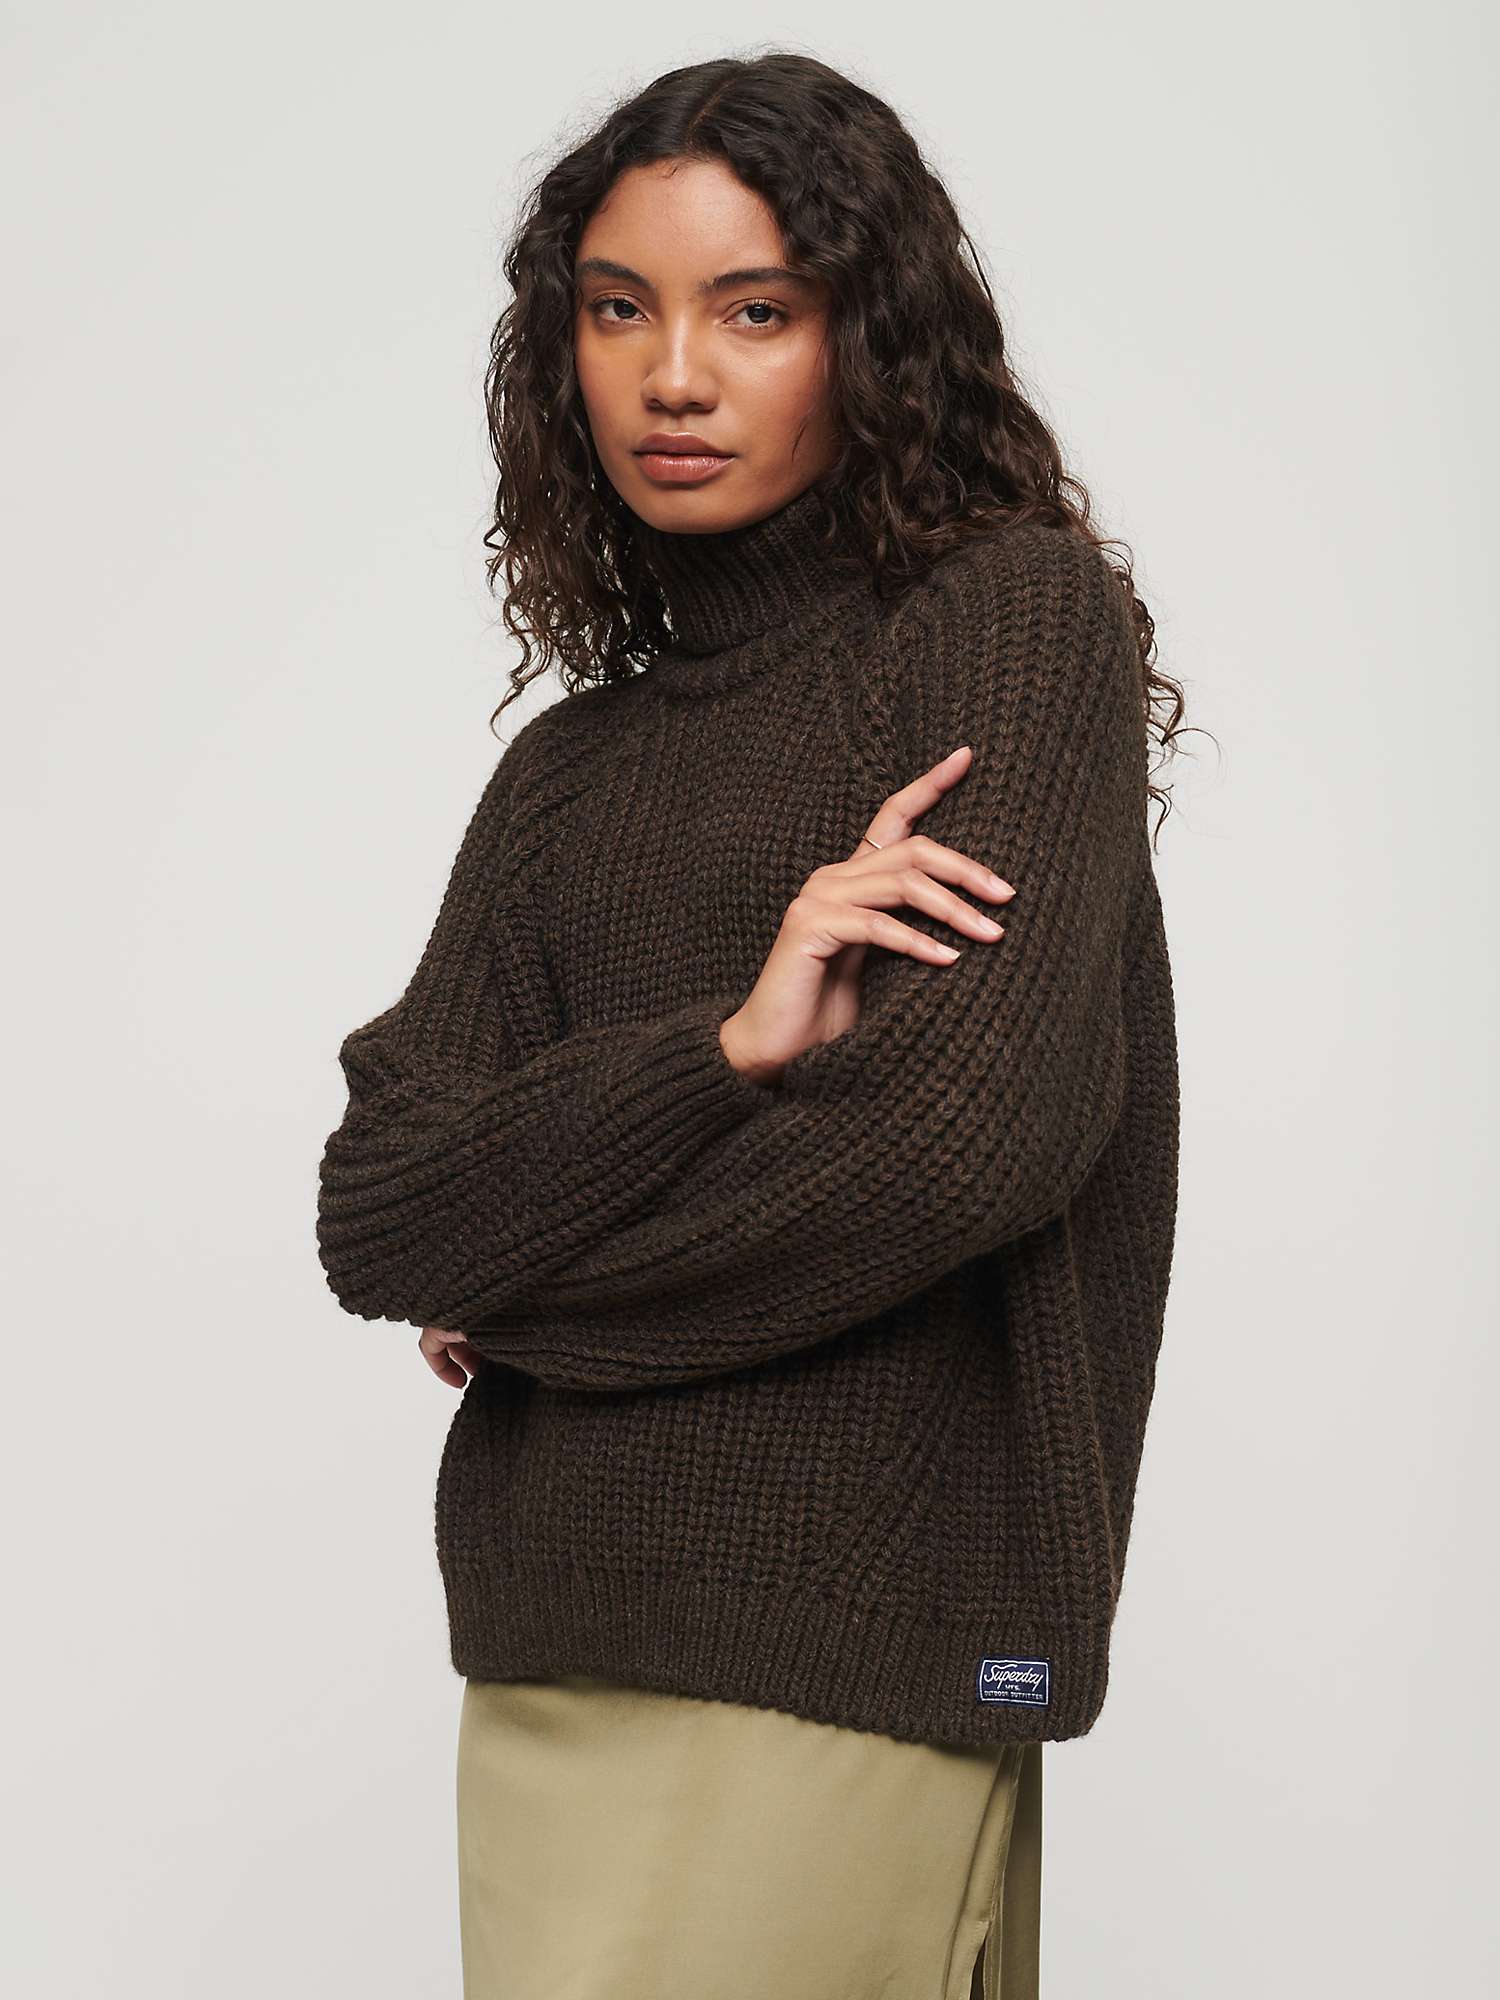 Buy Superdry Slouchy Stitch Roll Neck Wool Blend Jumper, Coco Marl Online at johnlewis.com